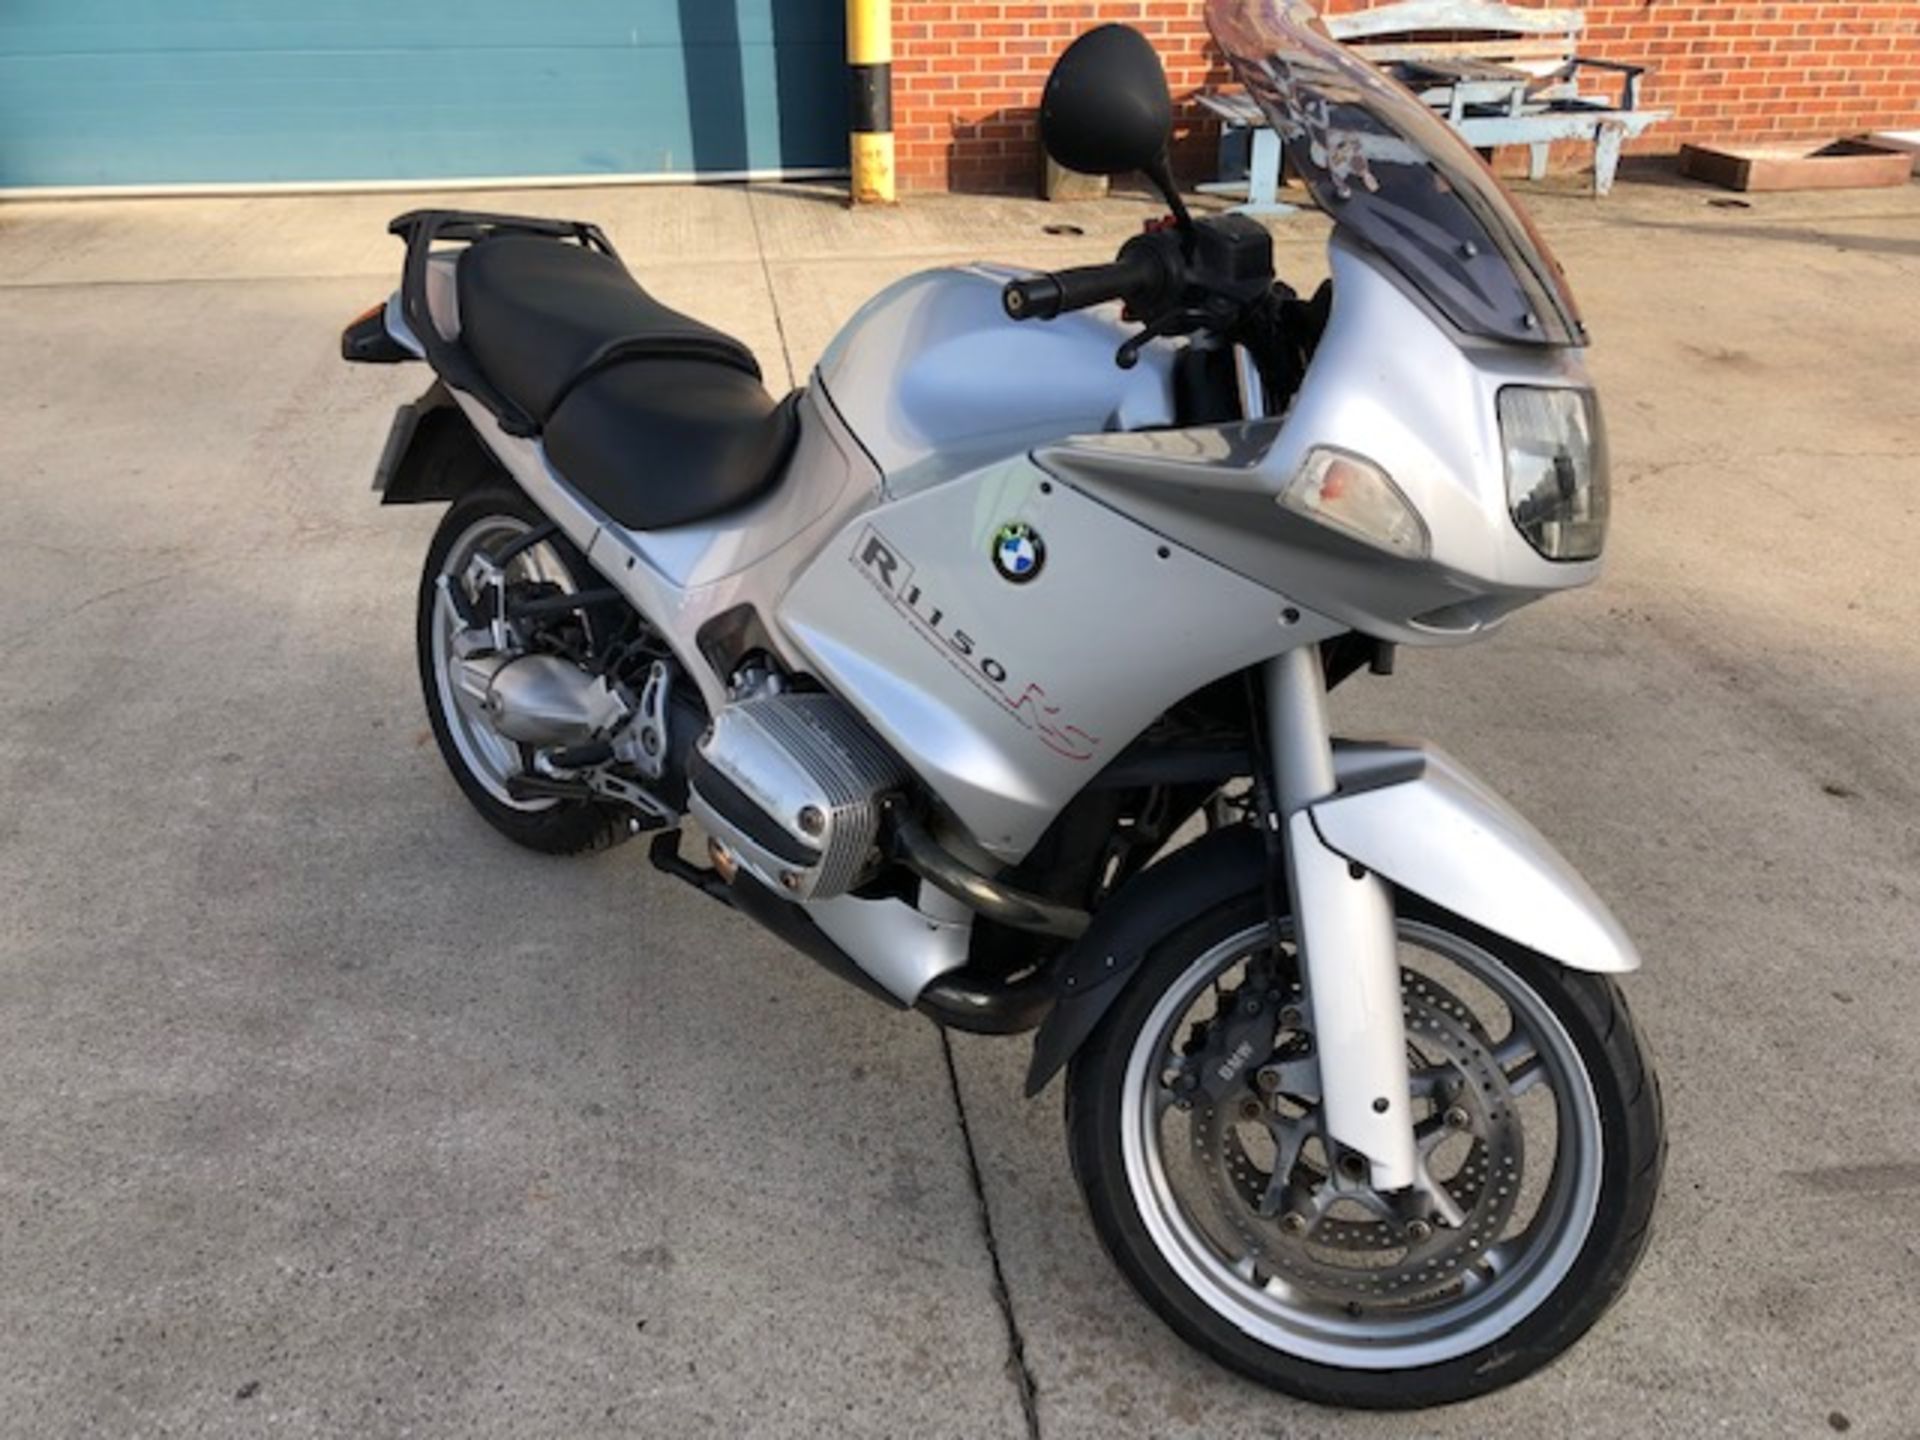 BMW R1150RS (1130cc) MOTORCYCLE - Petrol - Silver. Registration No: AW02 HHH. - Image 6 of 10